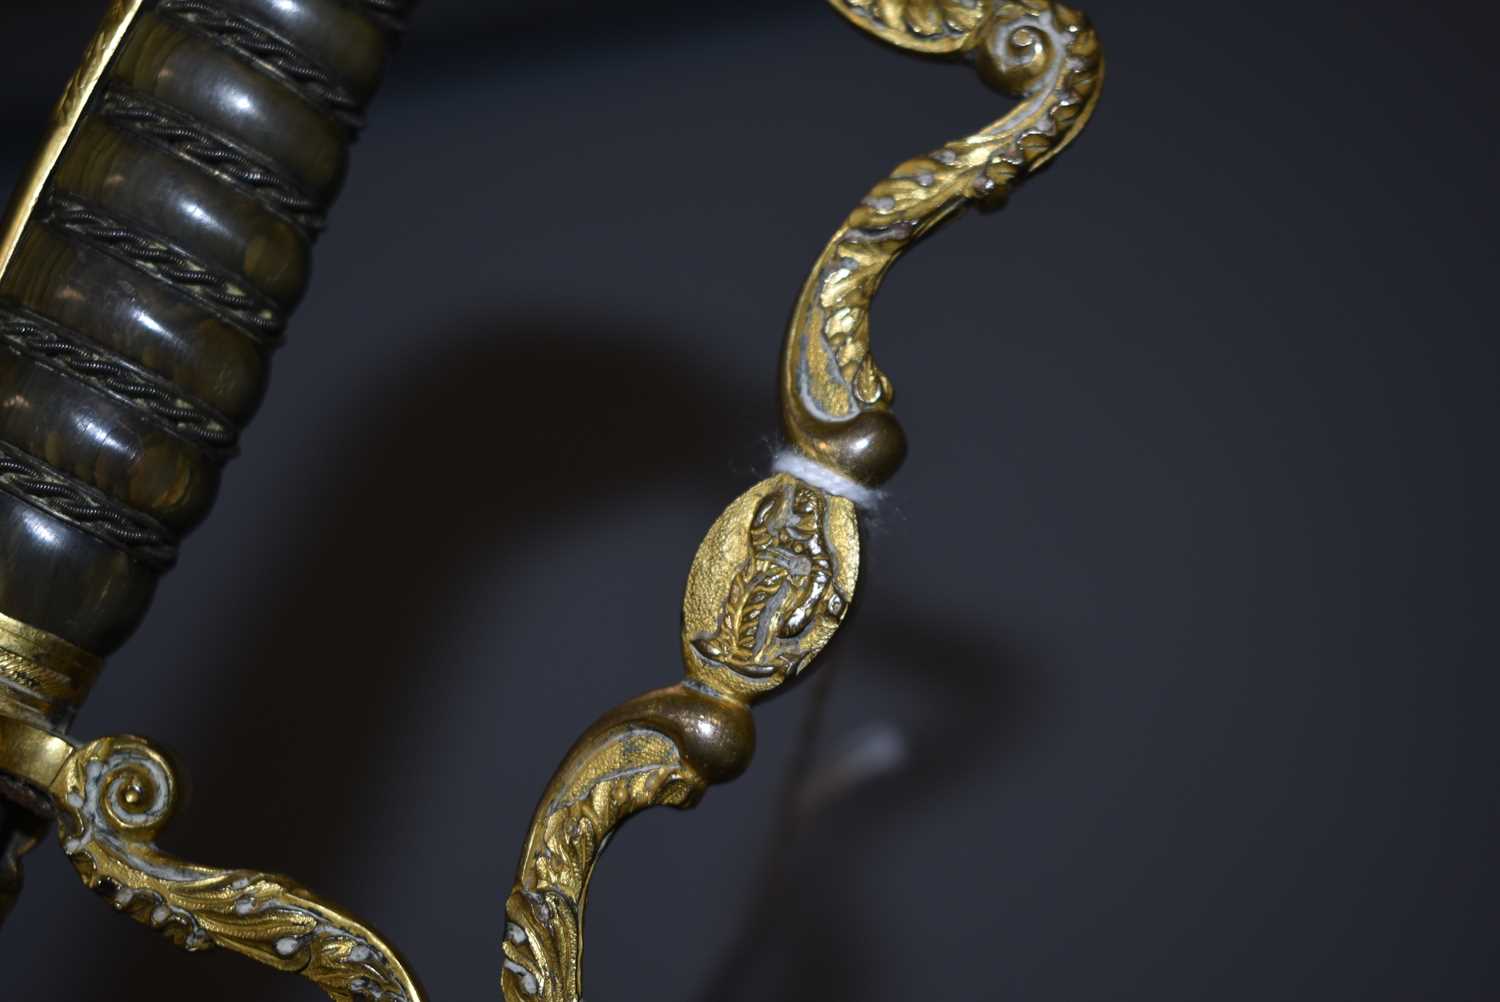 AN ORNATELY MOUNTED GEORGIAN NAVAL OFFICER'S SWORD, - Image 11 of 18